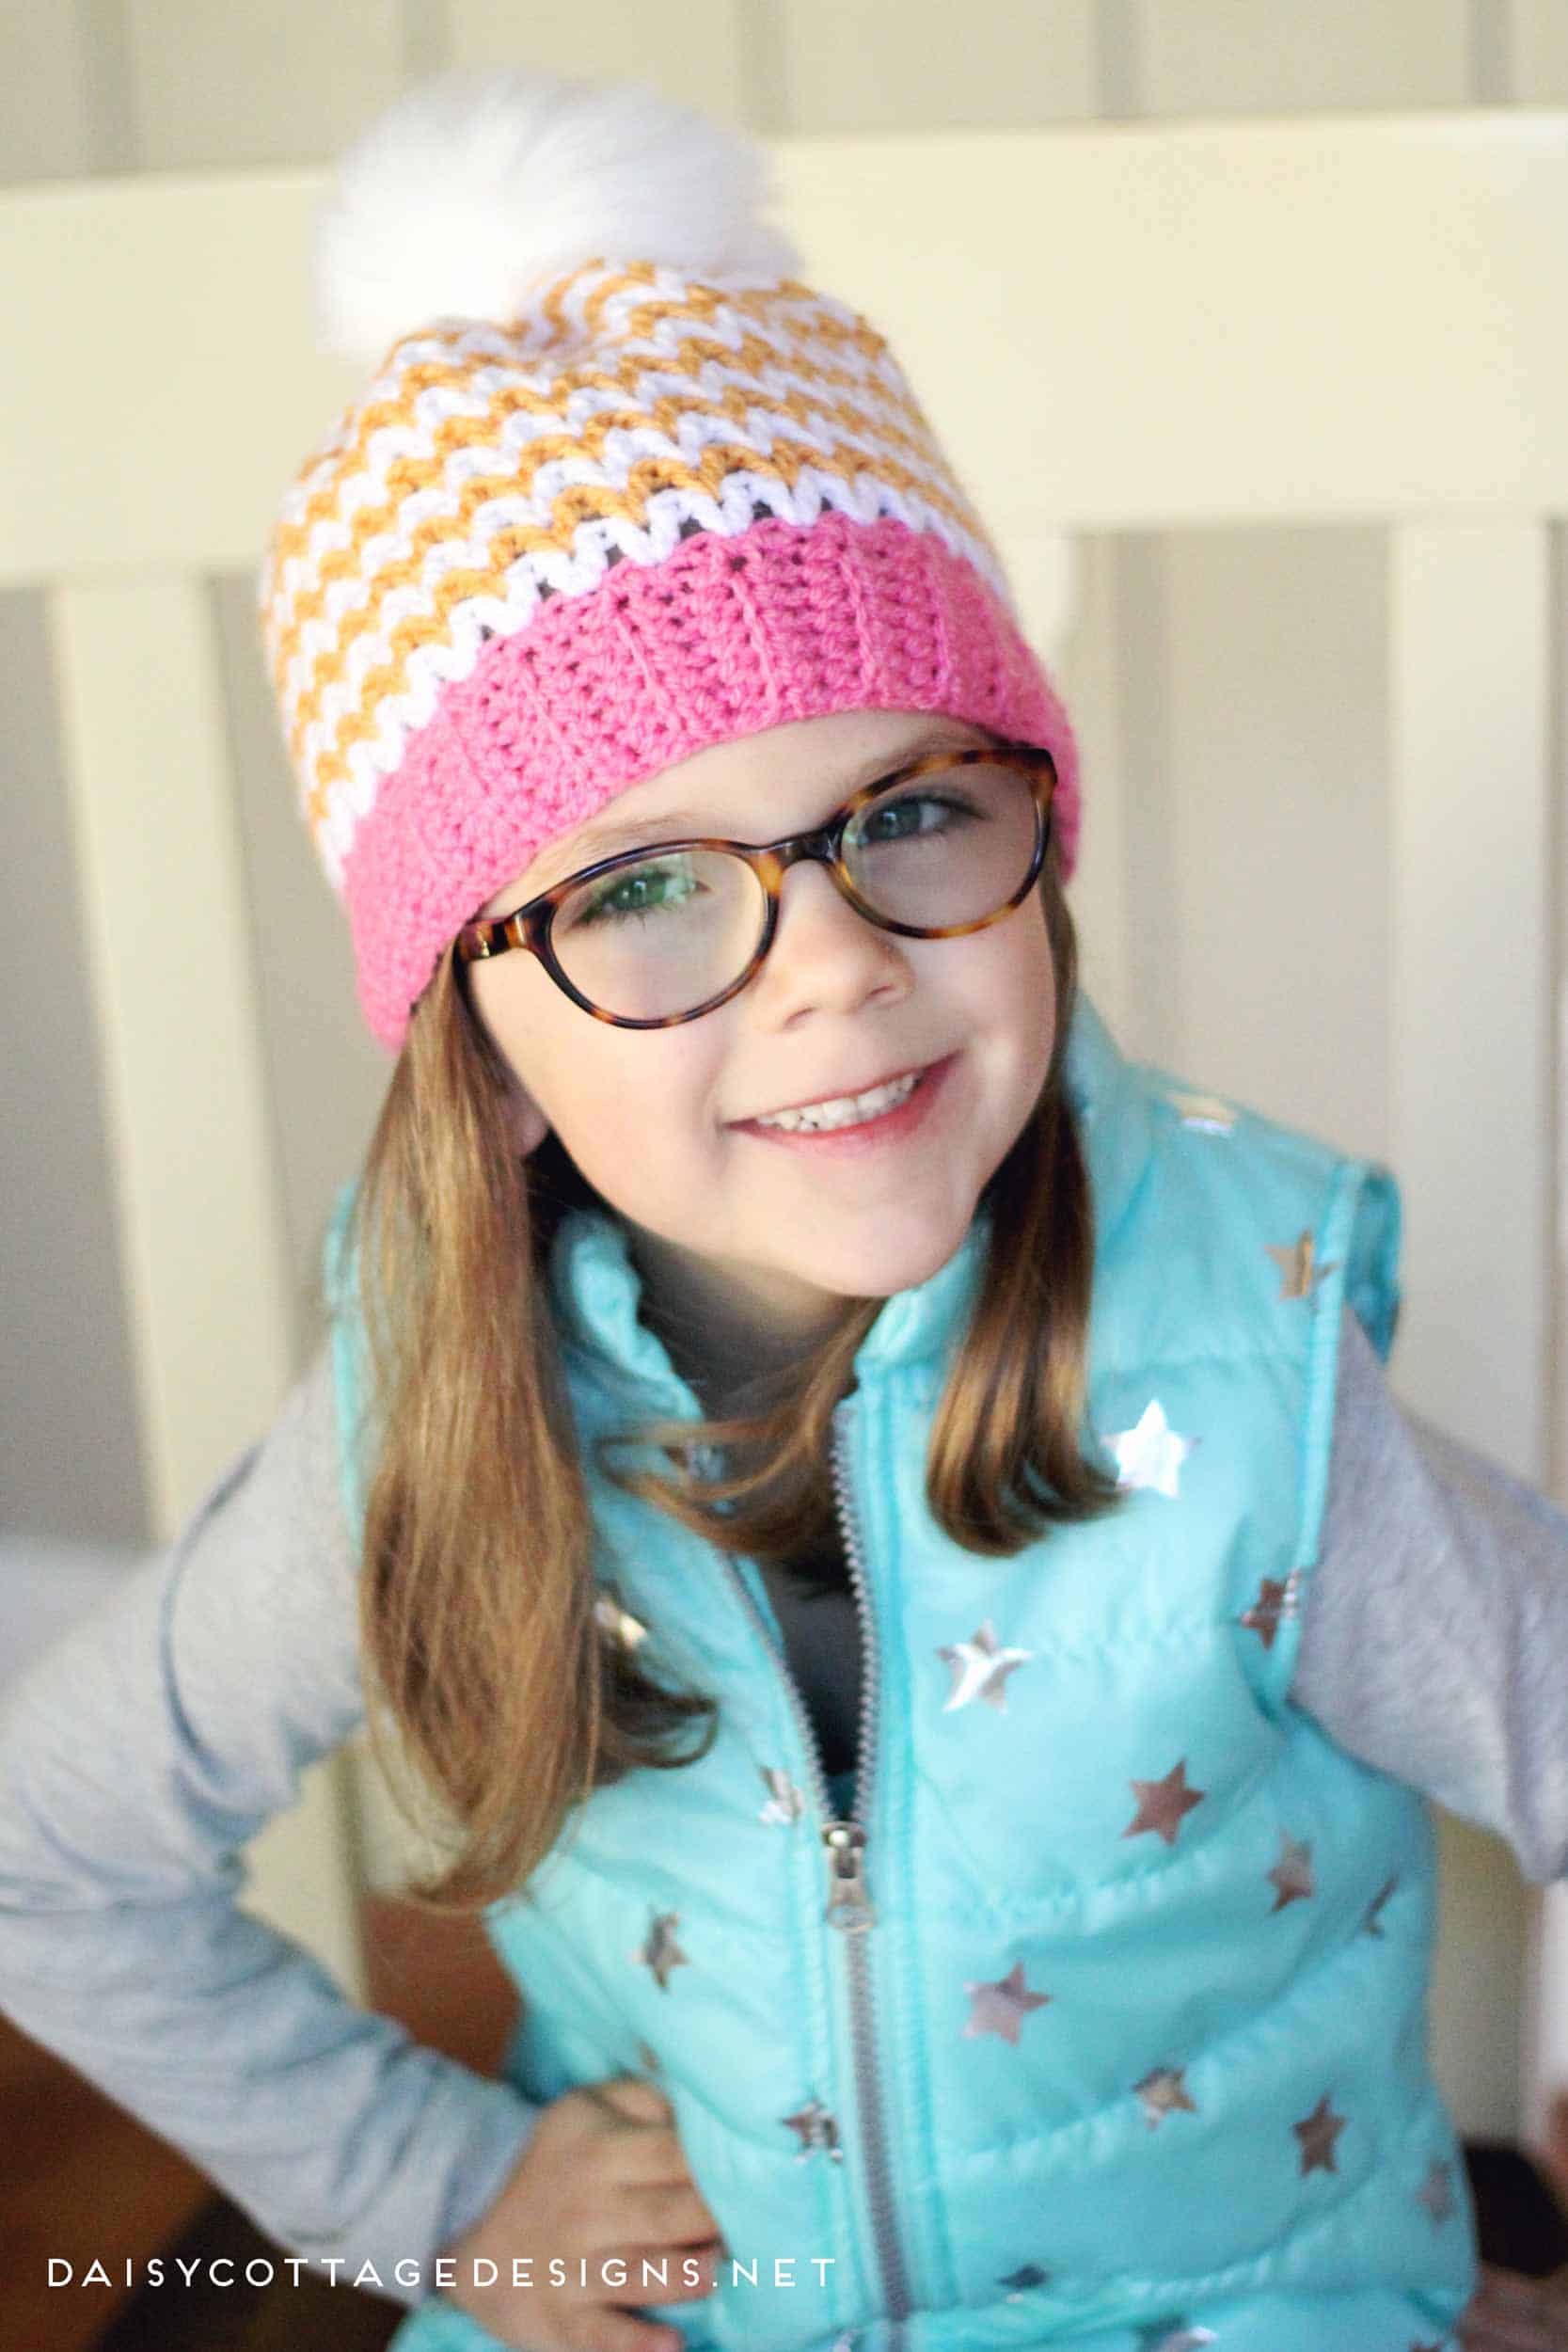 Use this free slouchy beanie crochet pattern from Daisy Cottage Designs to create gorgeous patterns for you, your friends, and your customers. | free crochet pattern, beanie crochet pattern, slouchy hat crochet pattern, slouch beanie crochet pattern, Quick Crochet Pattern, Beginner Crochet Pattern